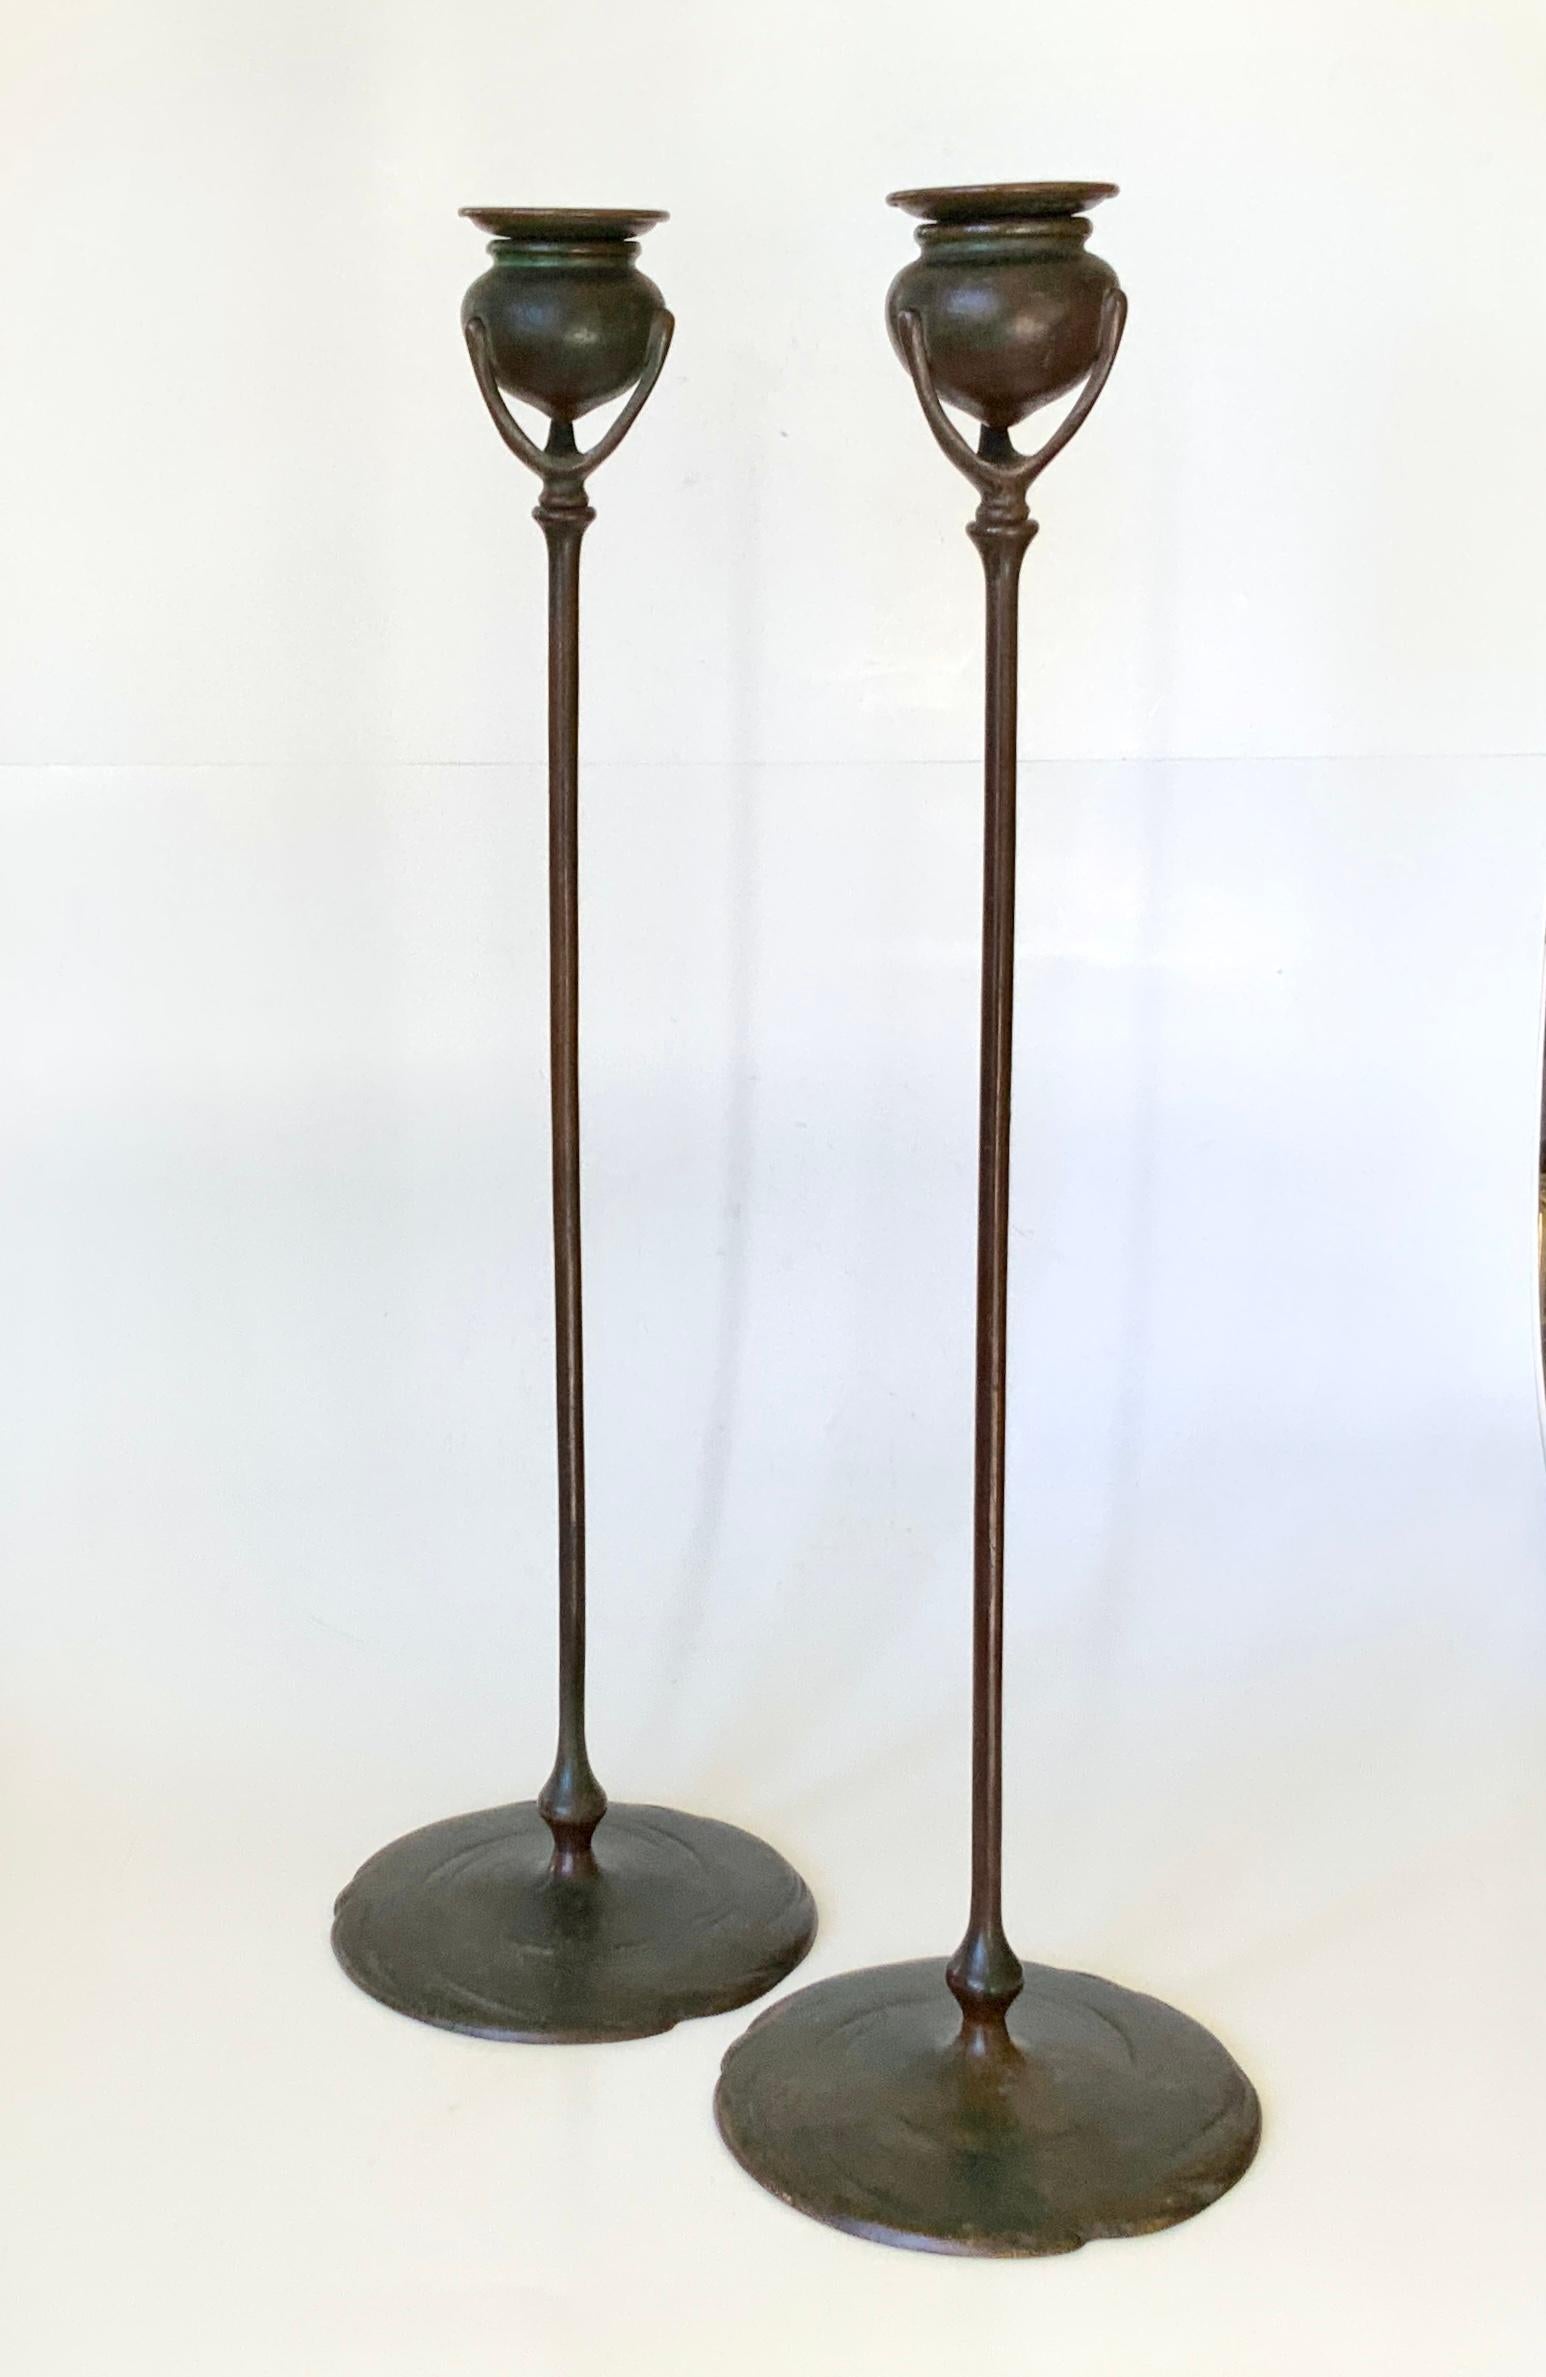 A beautiful pair of tall Tiffany Studios patinated bronze candlesticks. The candlesticks are both signed TIFFANY STUDIOS NEW YORK 1213. These are an early pair and have the original patinated finish showing, Tiffany’s reddish brown with green.